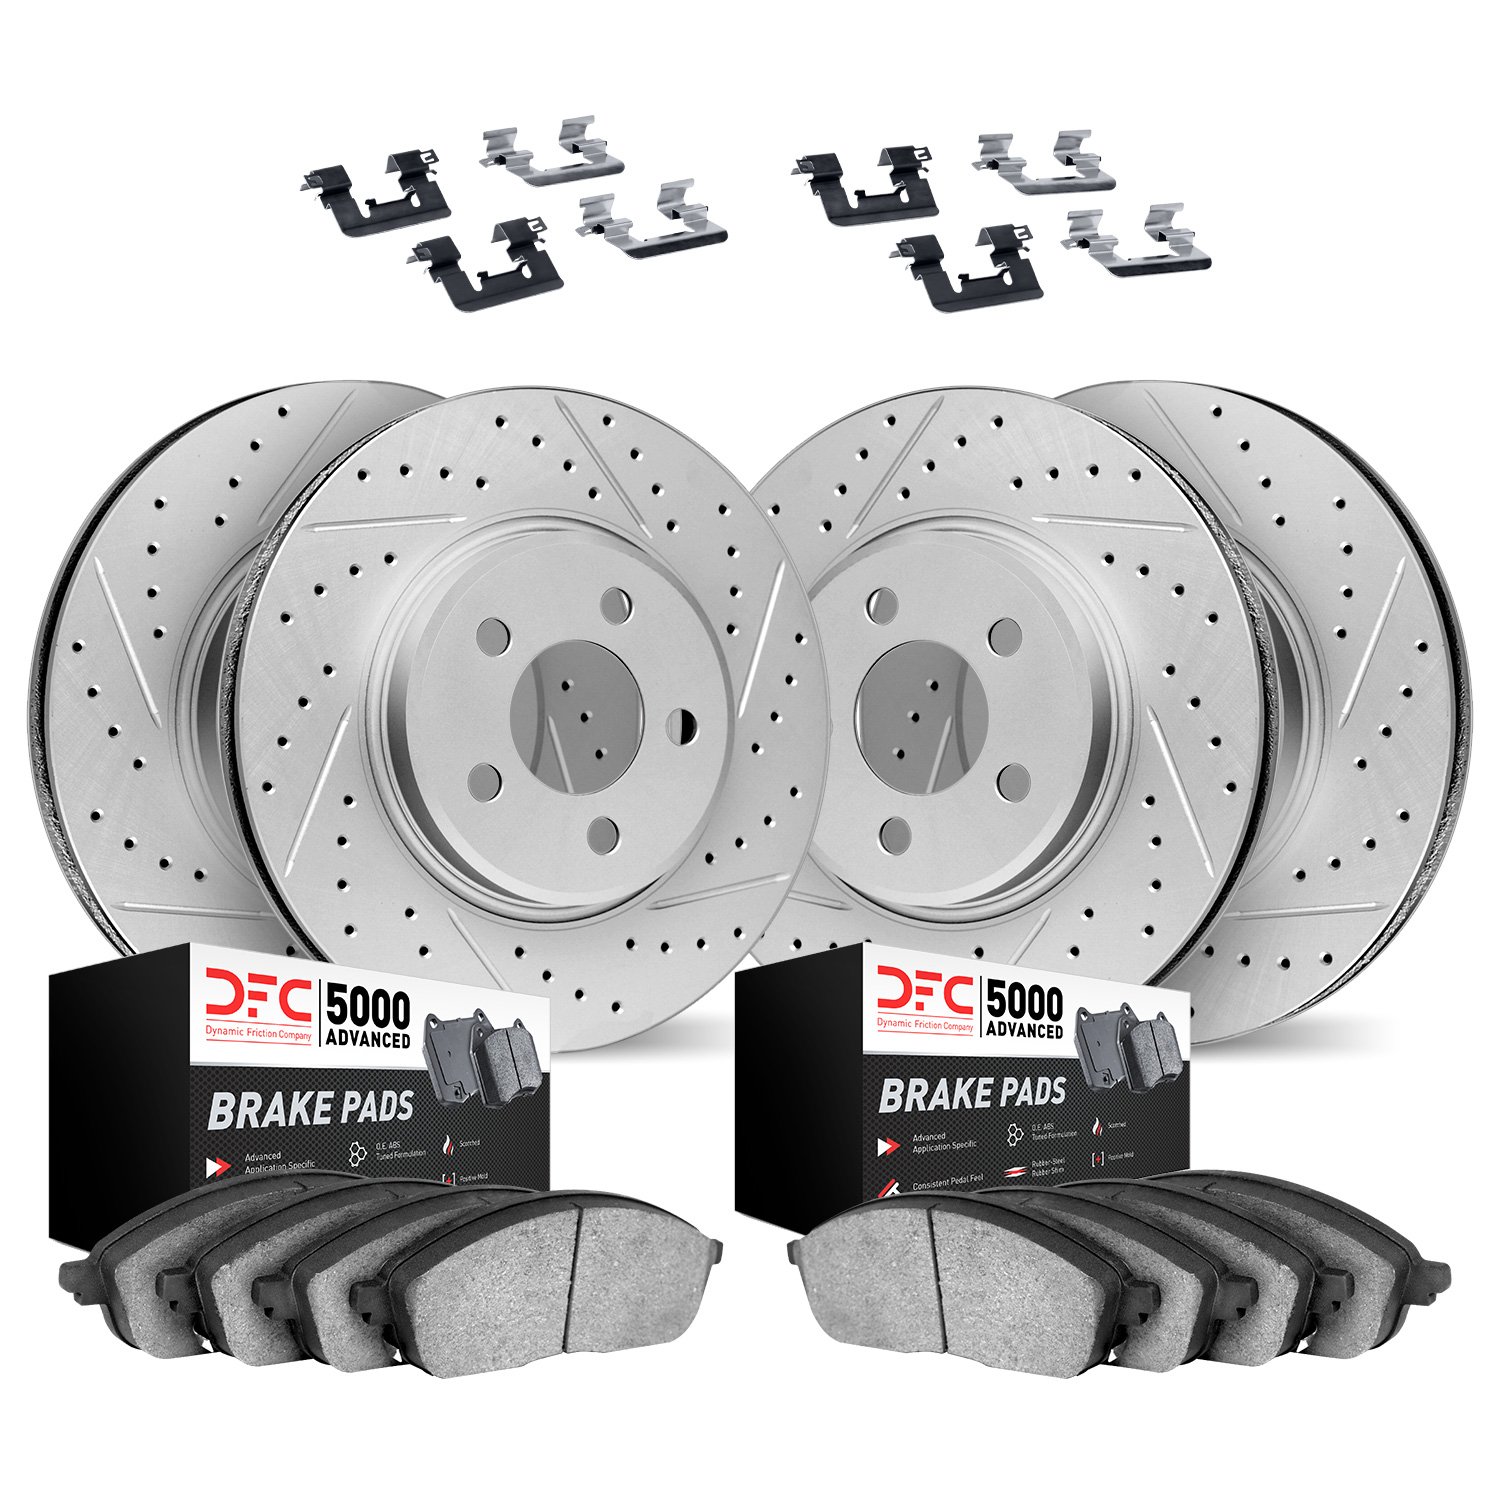 2514-31046 Geoperformance Drilled/Slotted Rotors w/5000 Advanced Brake Pads Kit & Hardware, 2007-2014 BMW, Position: Front and R